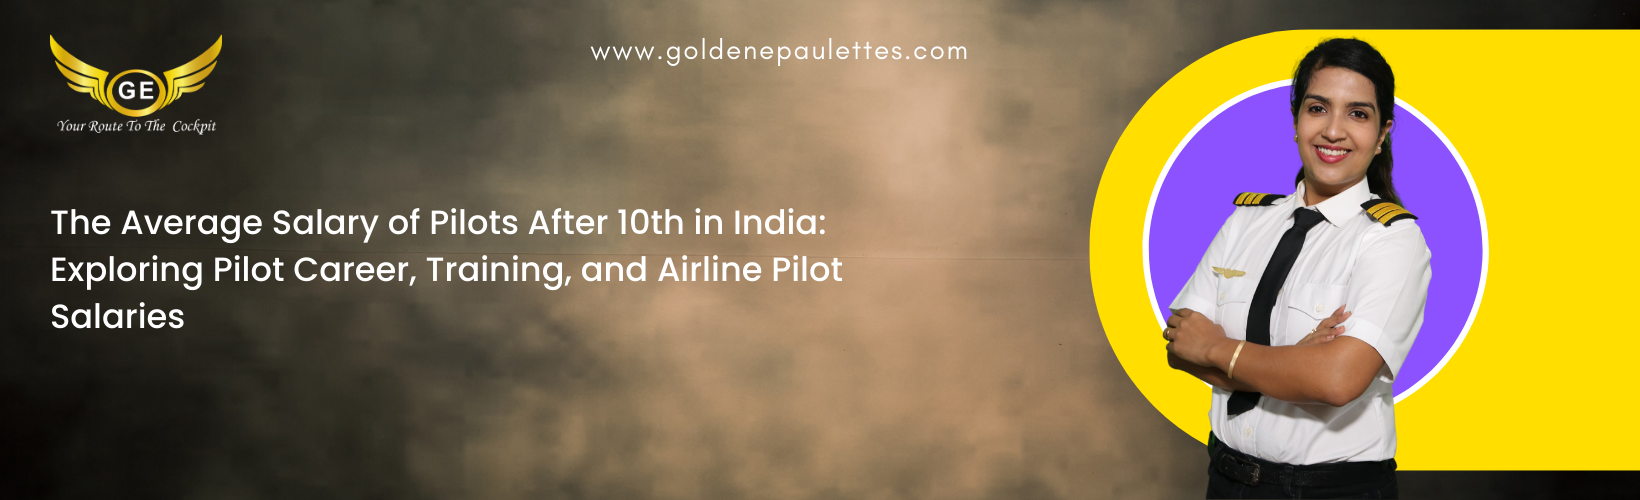 What is the Average Salary for Pilots After 10th in India